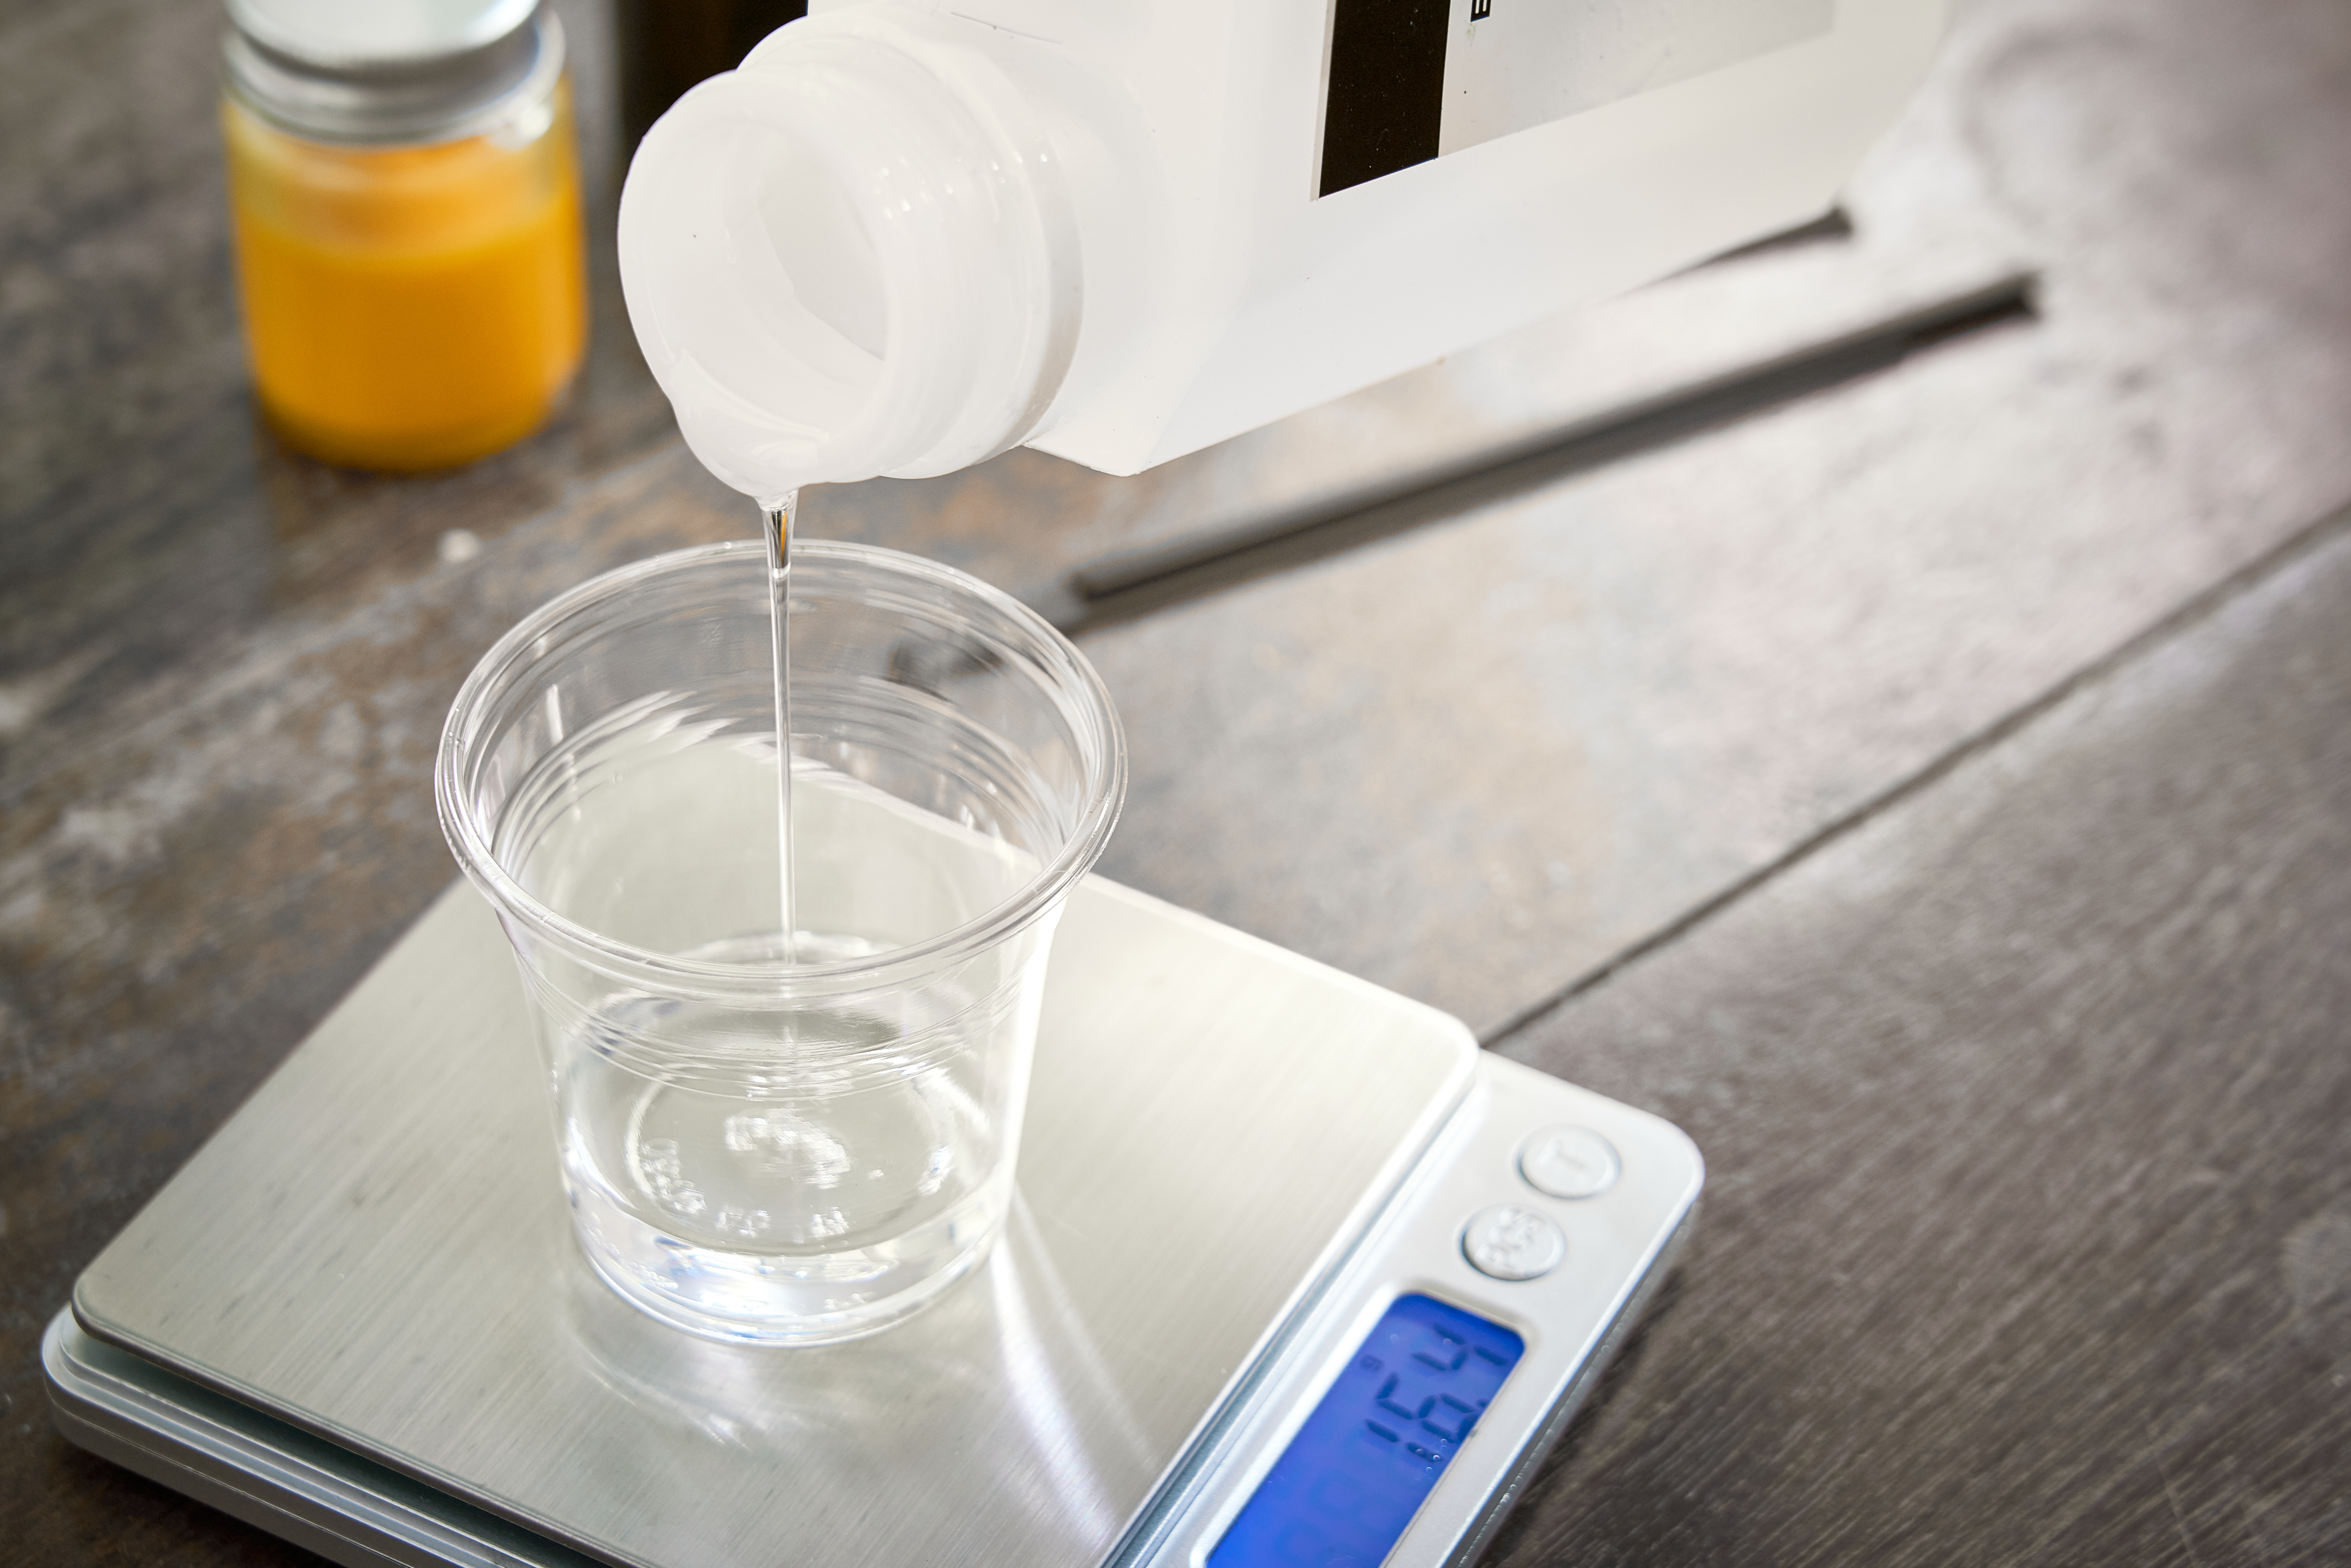 Pouring resin into a plastic cup on a food scale. | Source: Shutterstock